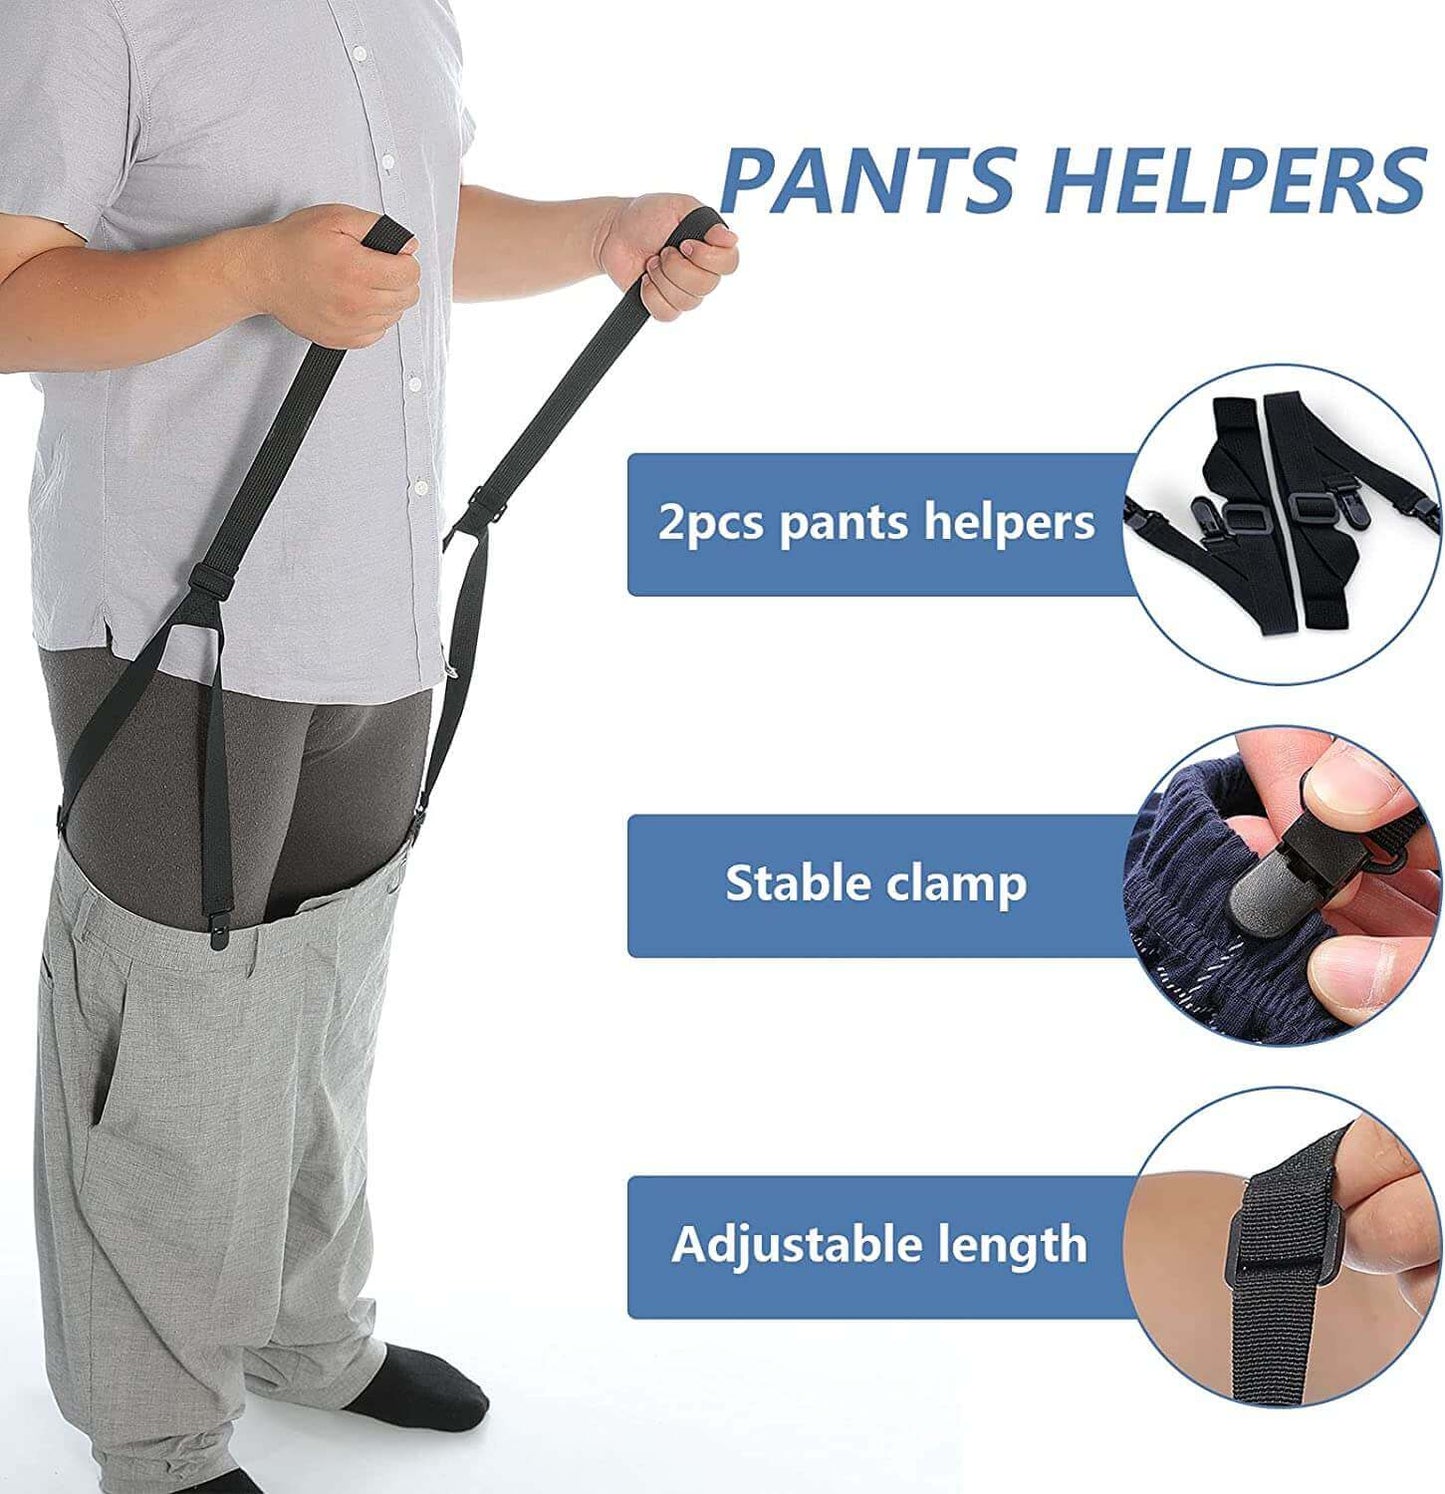 Fanwer Dressing Aid for Socks&Pants, Dressing Assist Tool for Elderly, the pants dressing aid